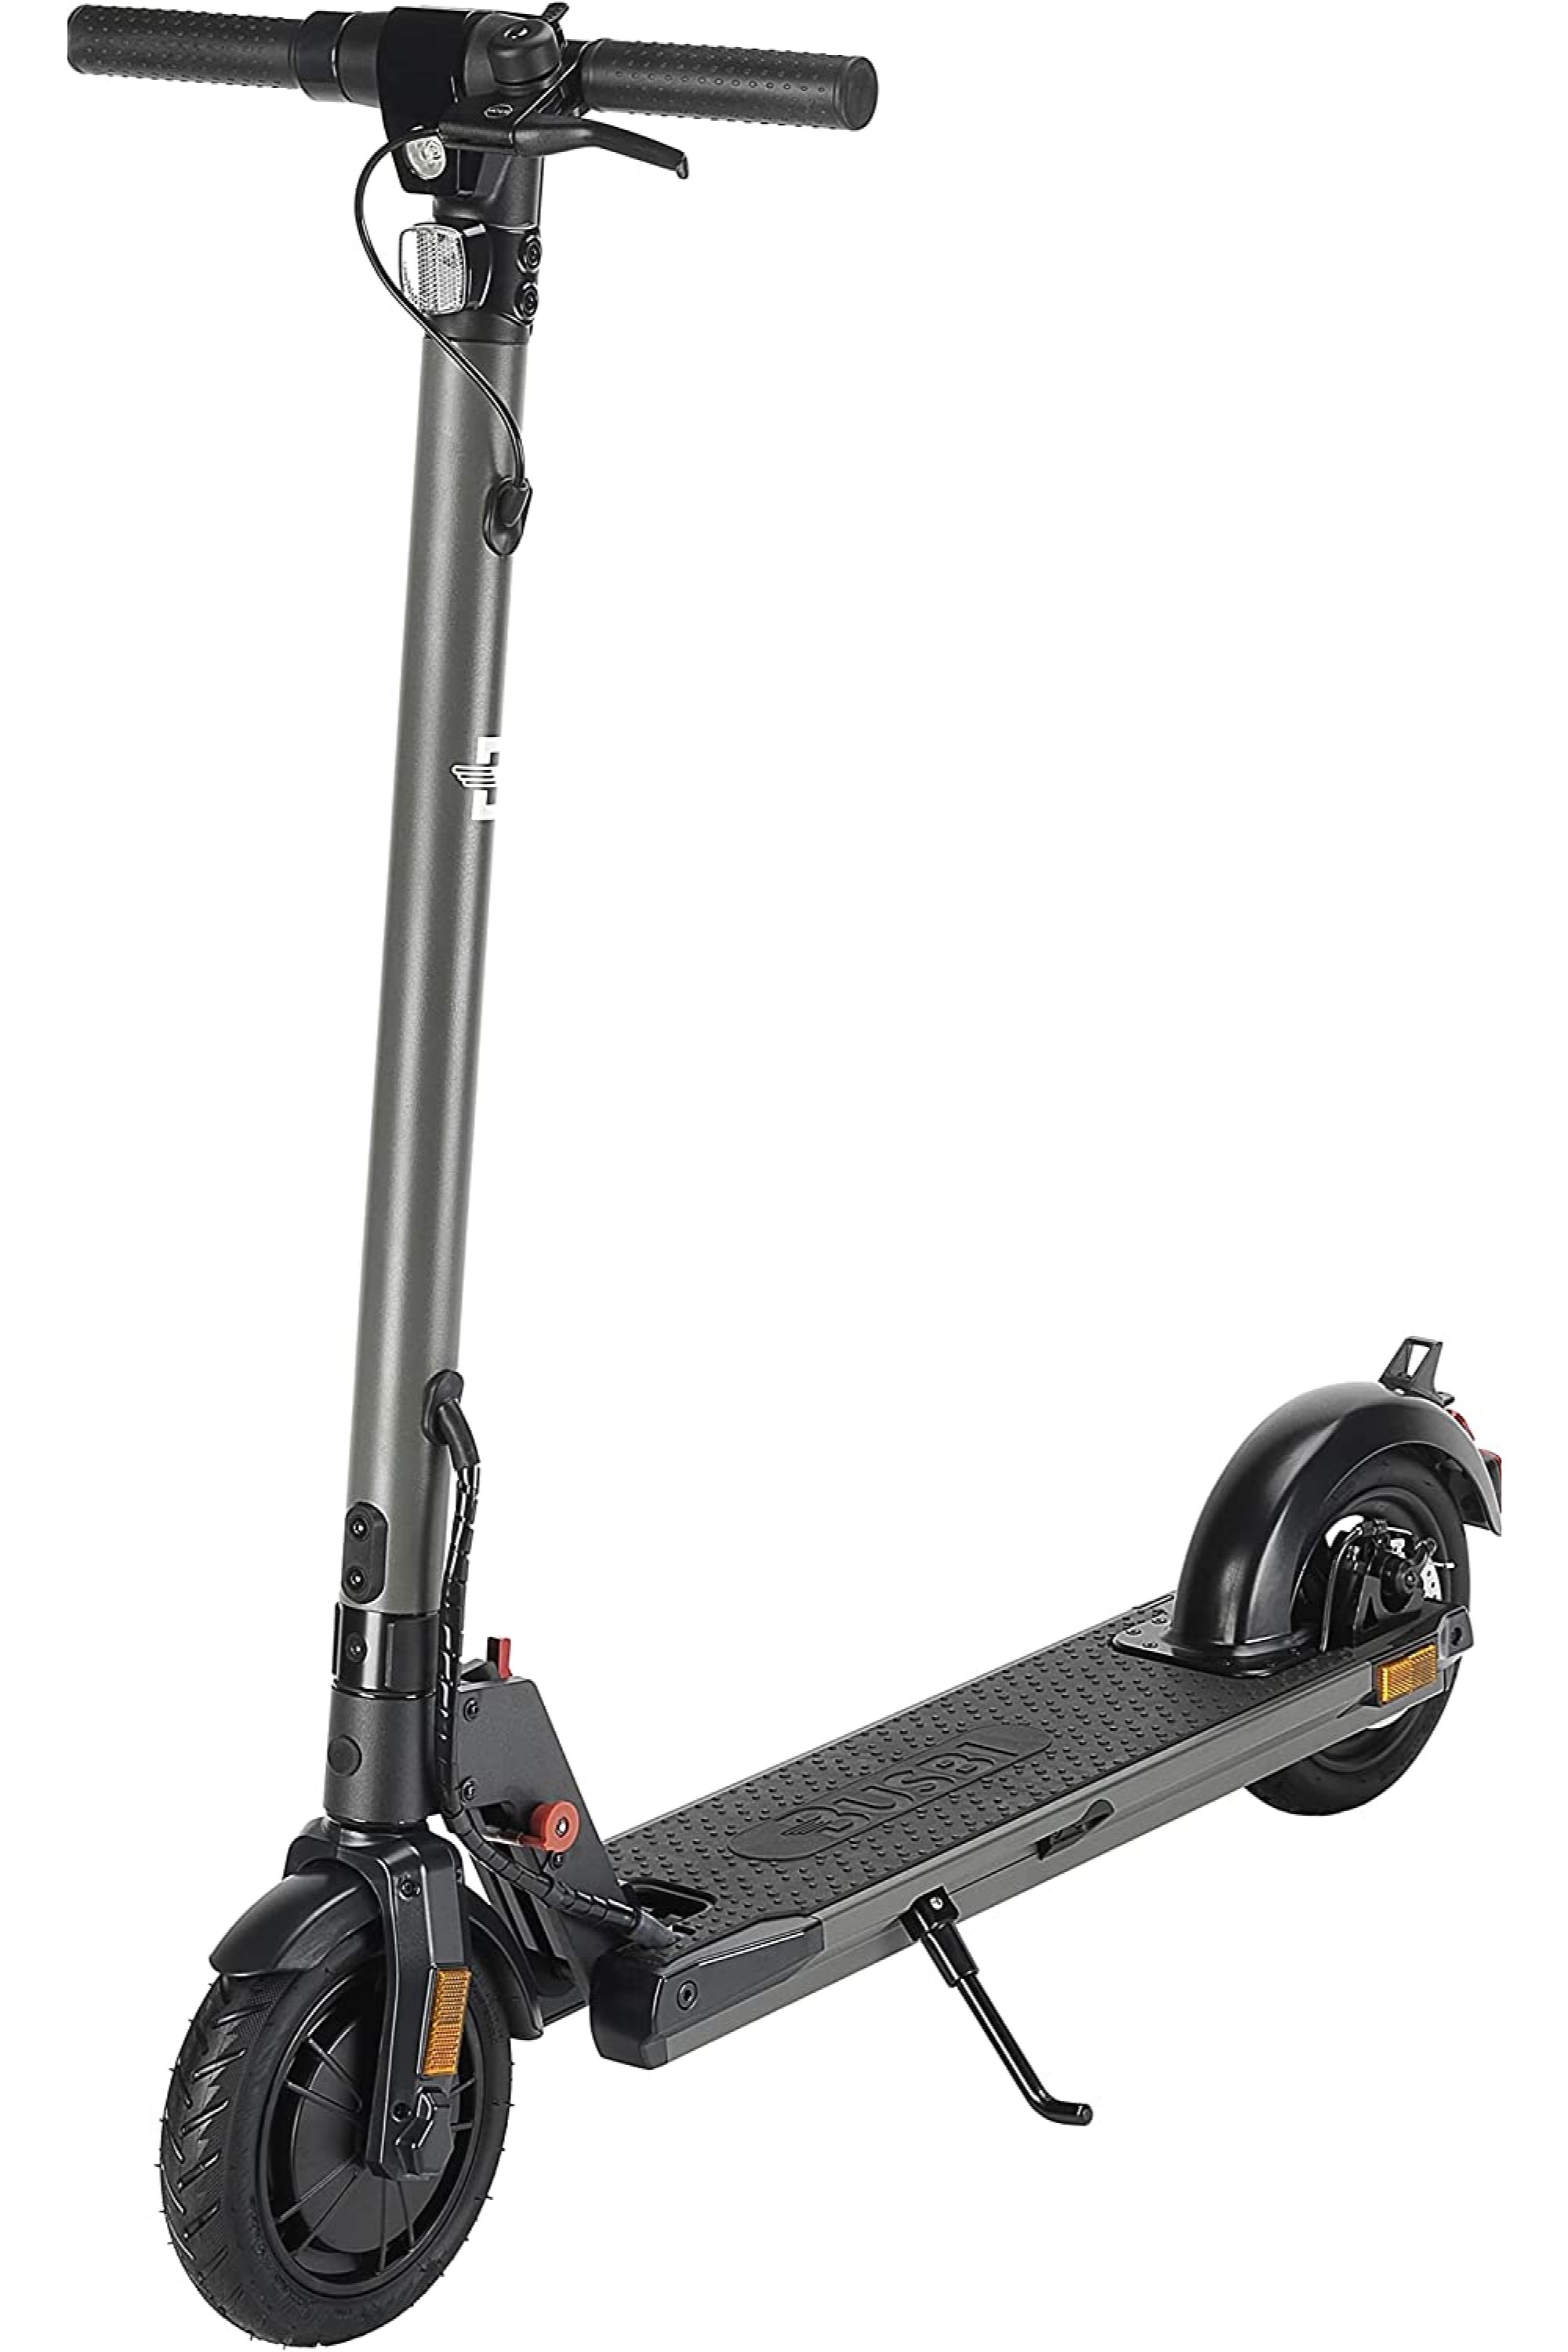 Busbi Wasp Electric Scooter (up to 30KM range) -